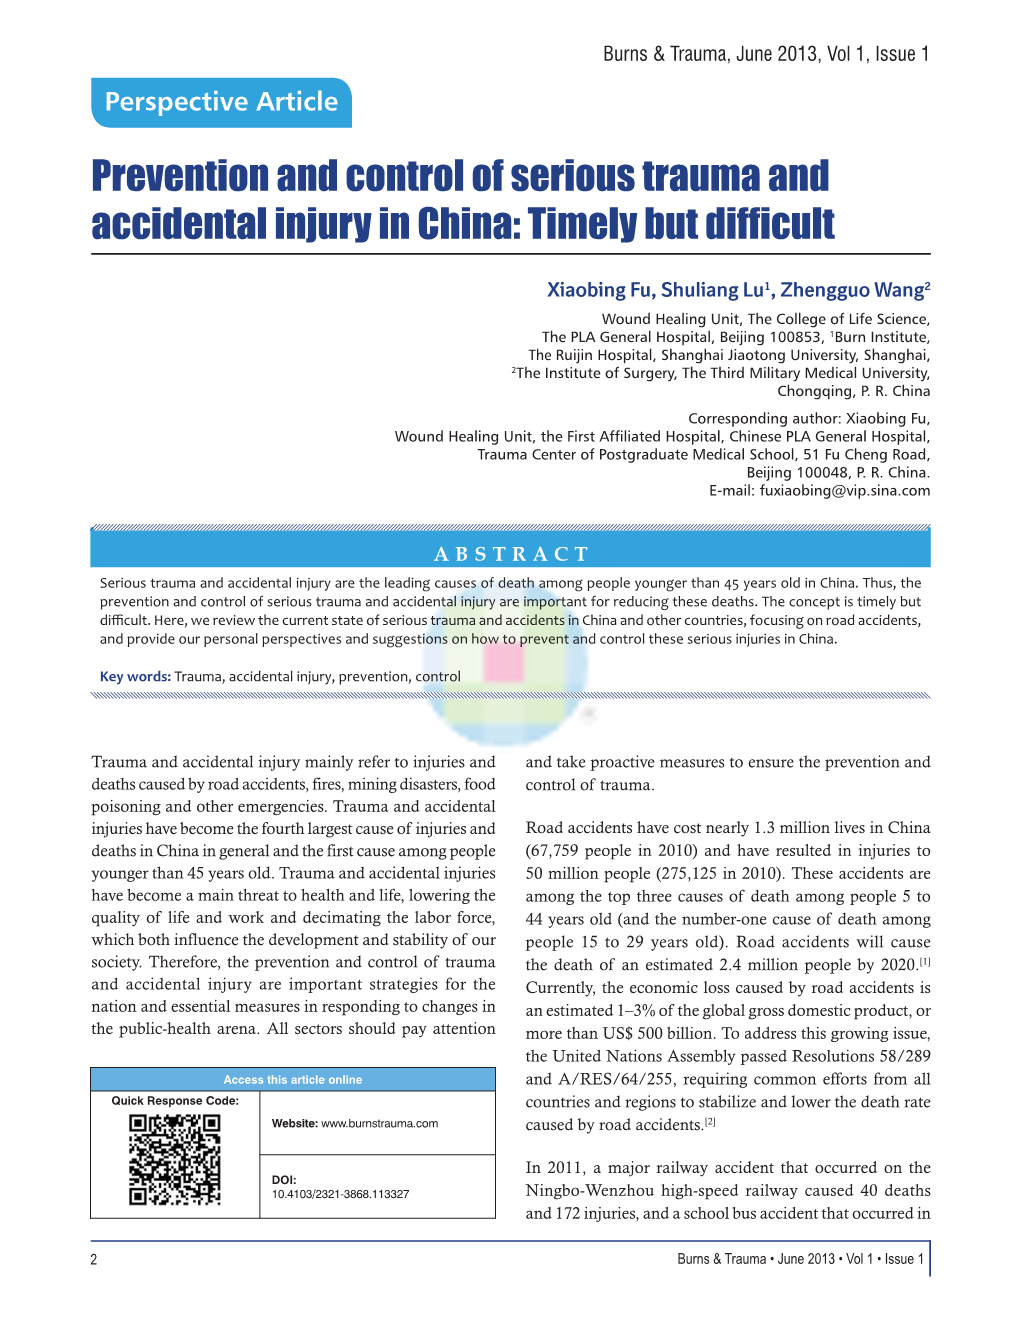 Prevention and Control of Serious Trauma and Accidental Injury in China: Timely but Difficult